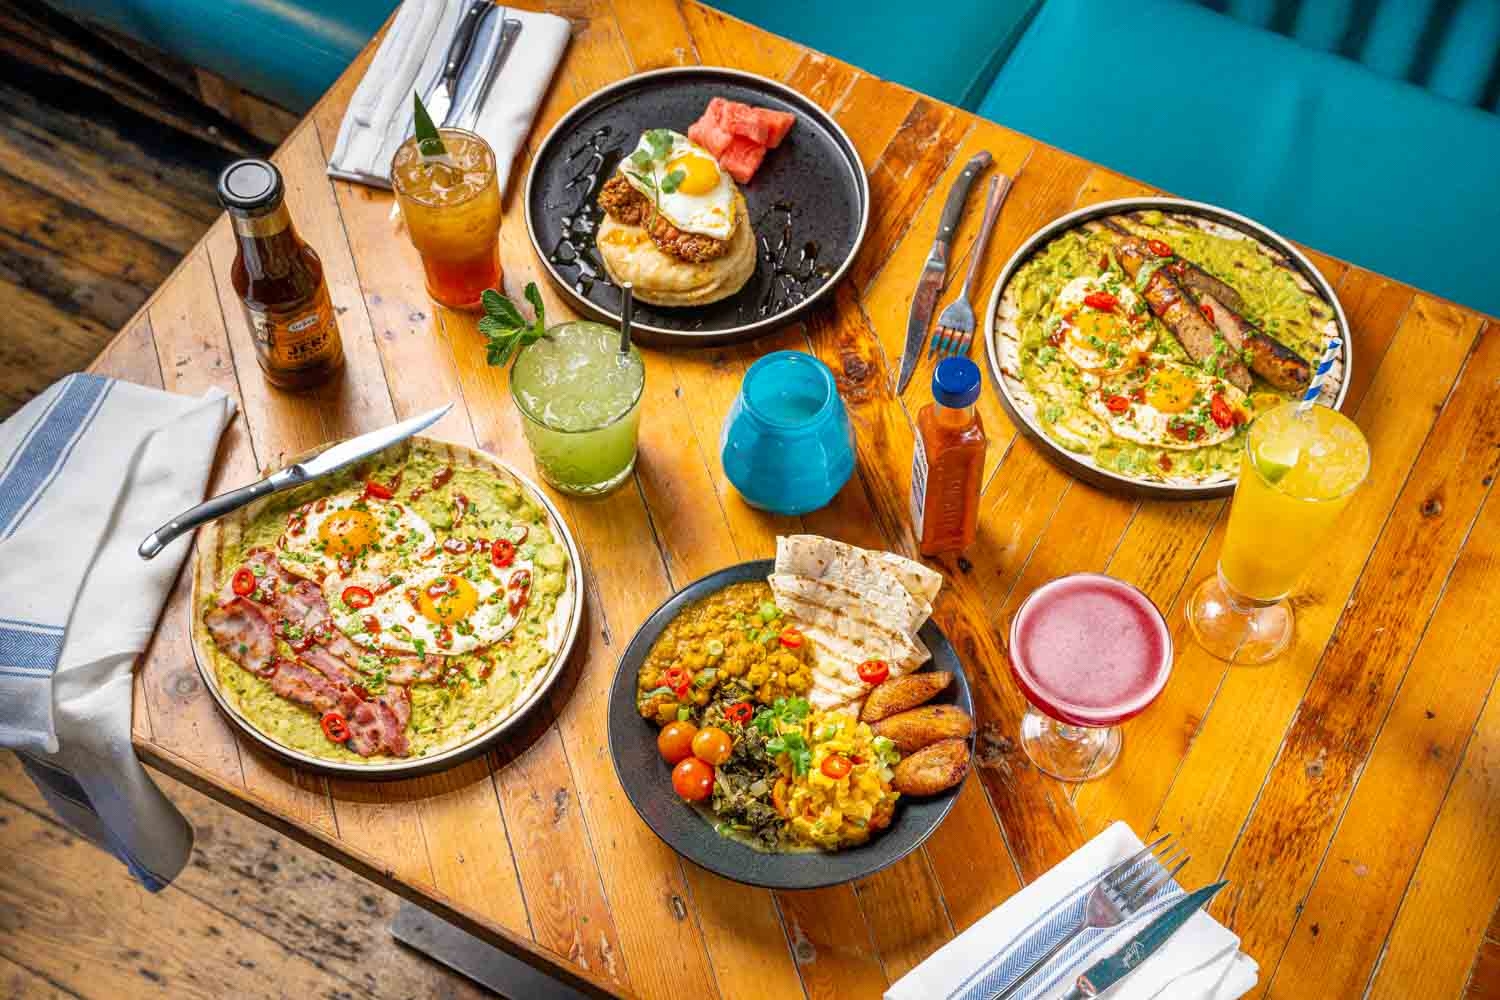 Brunch dishes on the table with tropical cocktails